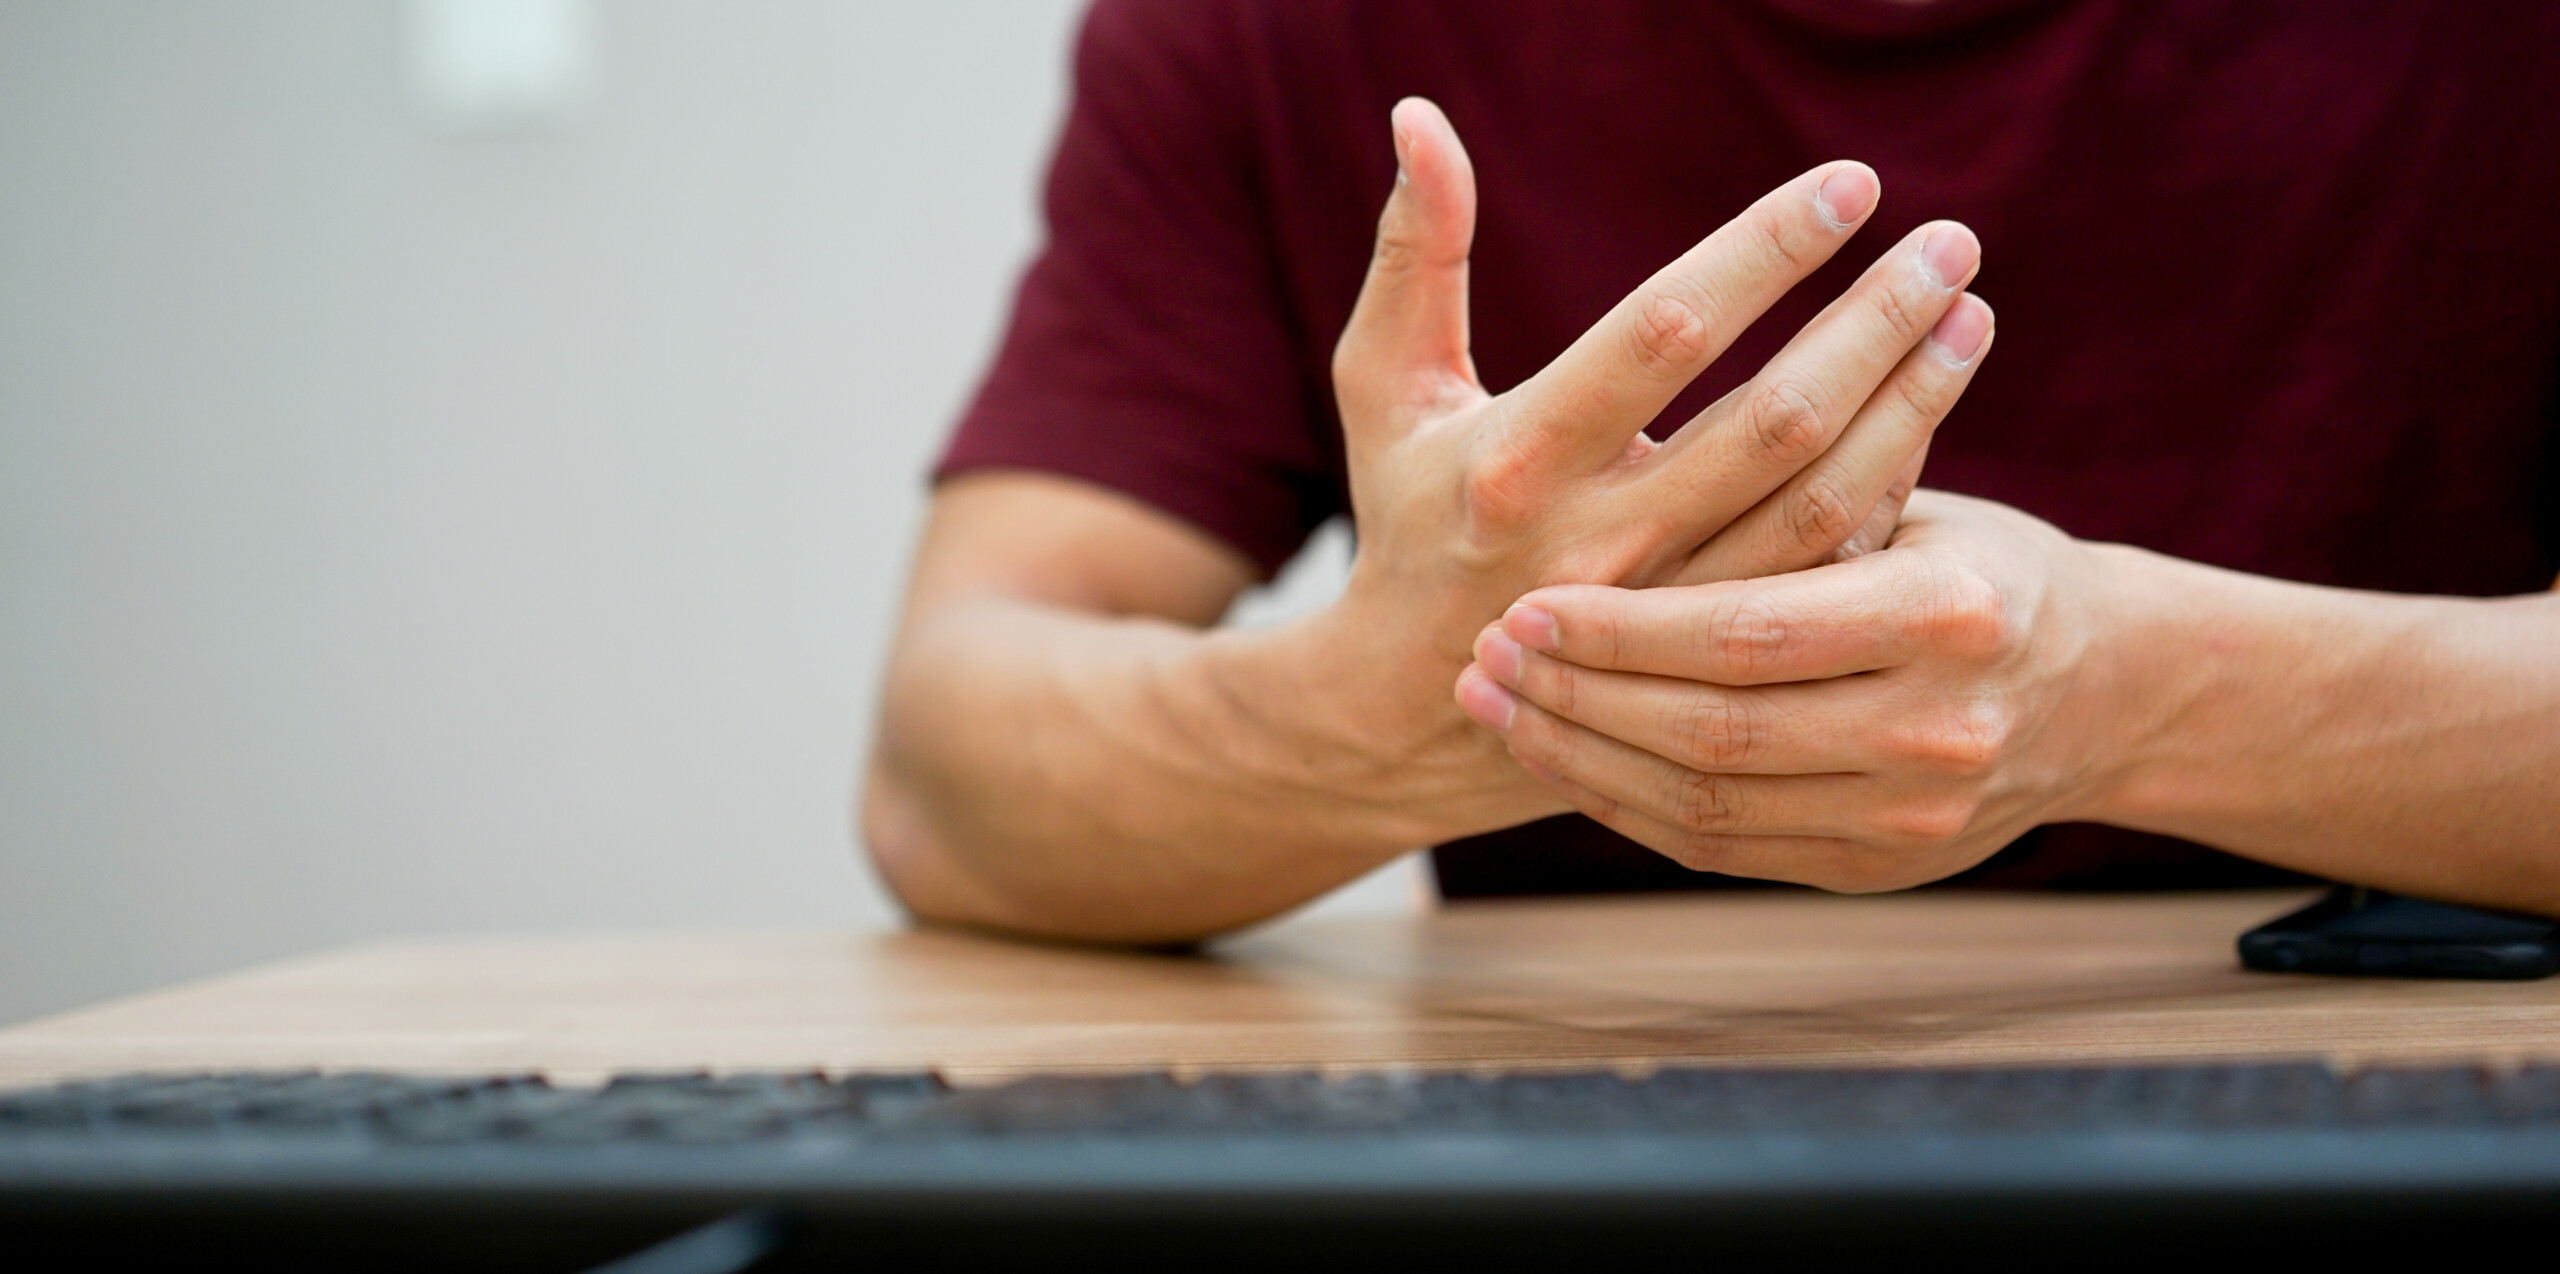 What causes carpal tunnel?